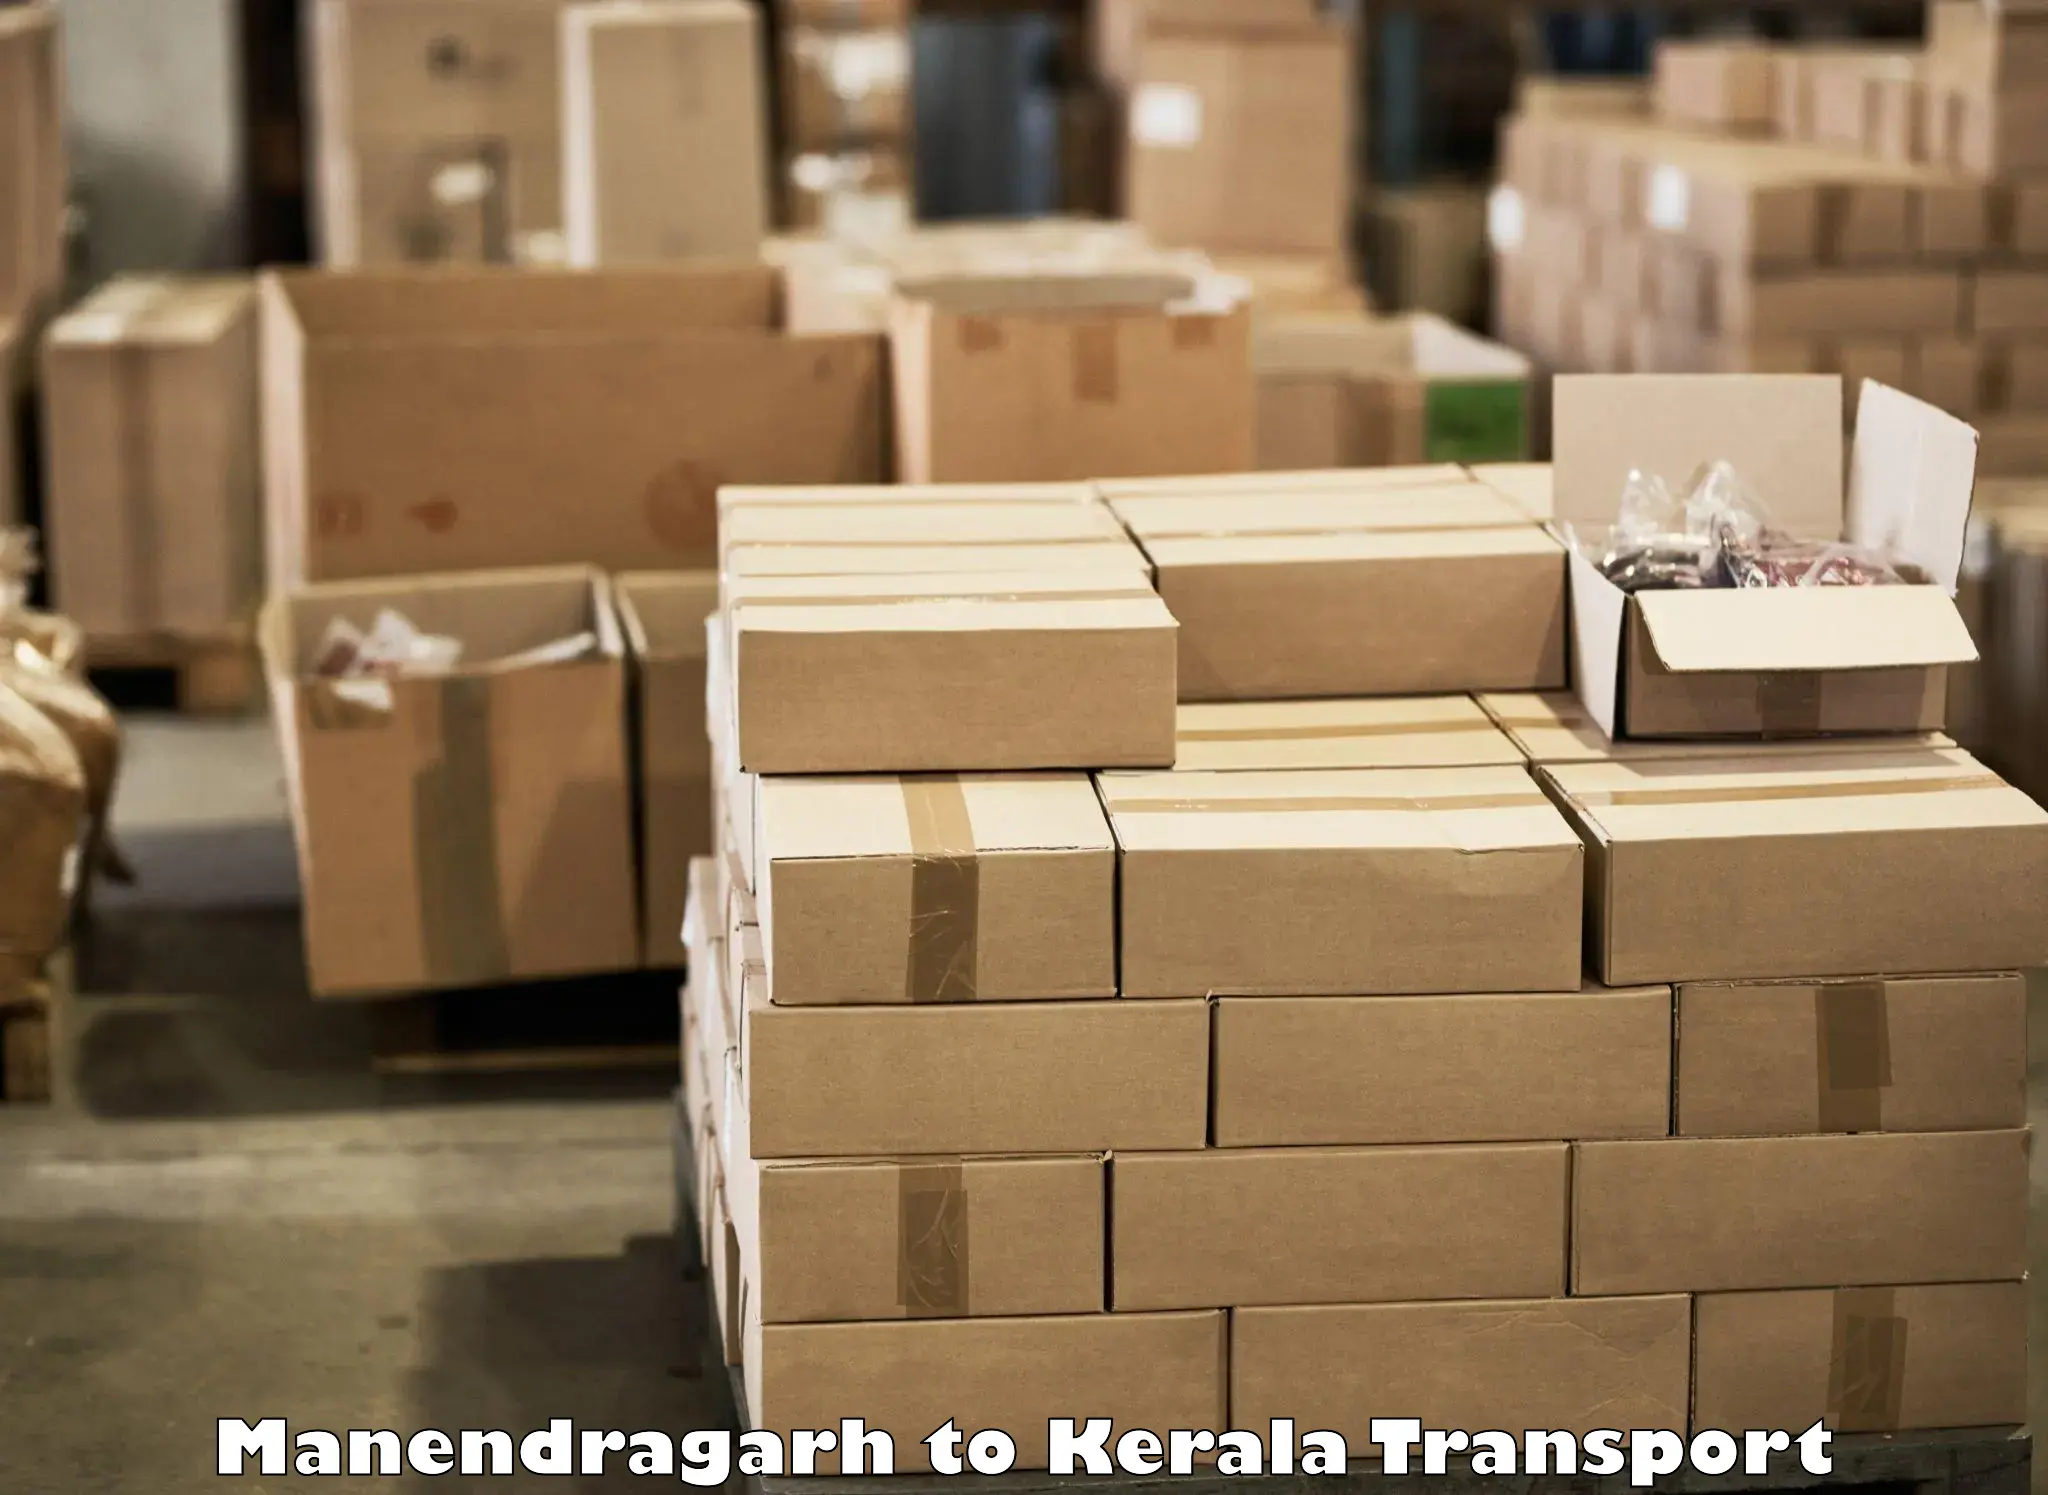 Container transport service Manendragarh to Payyanur